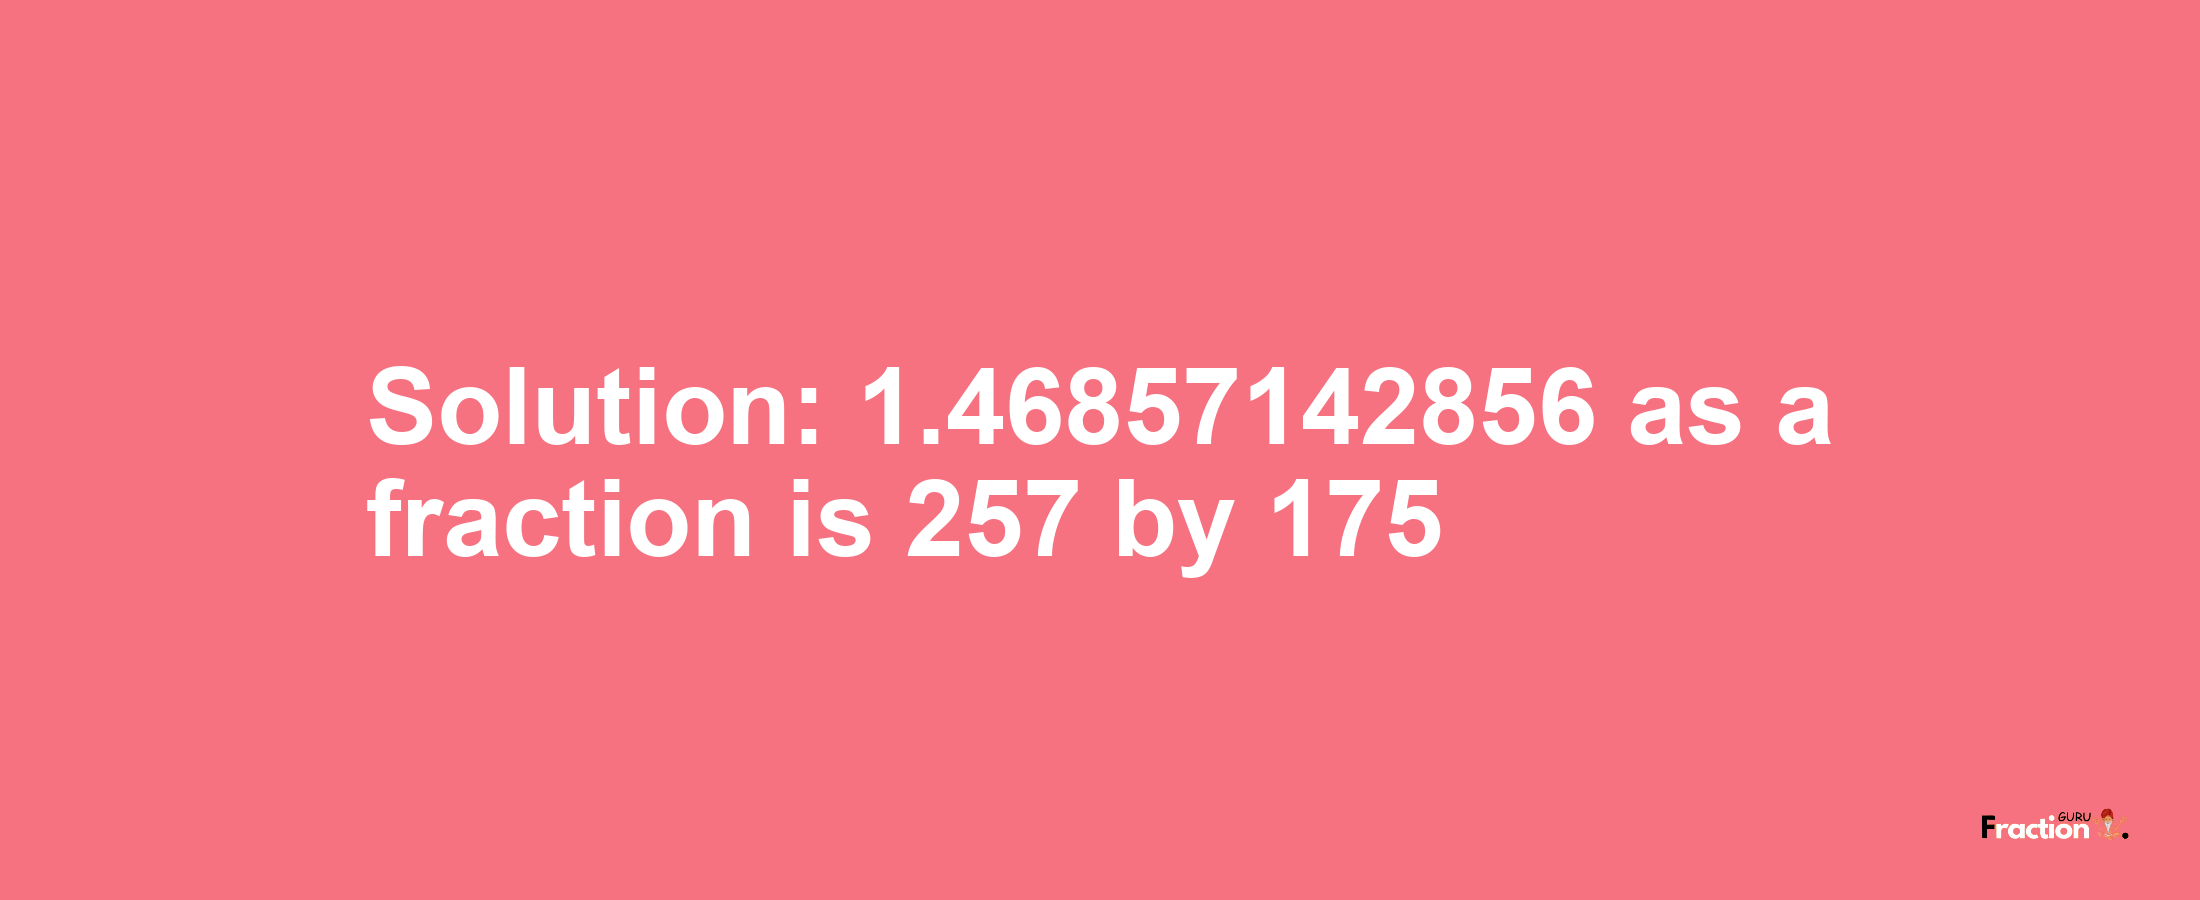 Solution:1.46857142856 as a fraction is 257/175